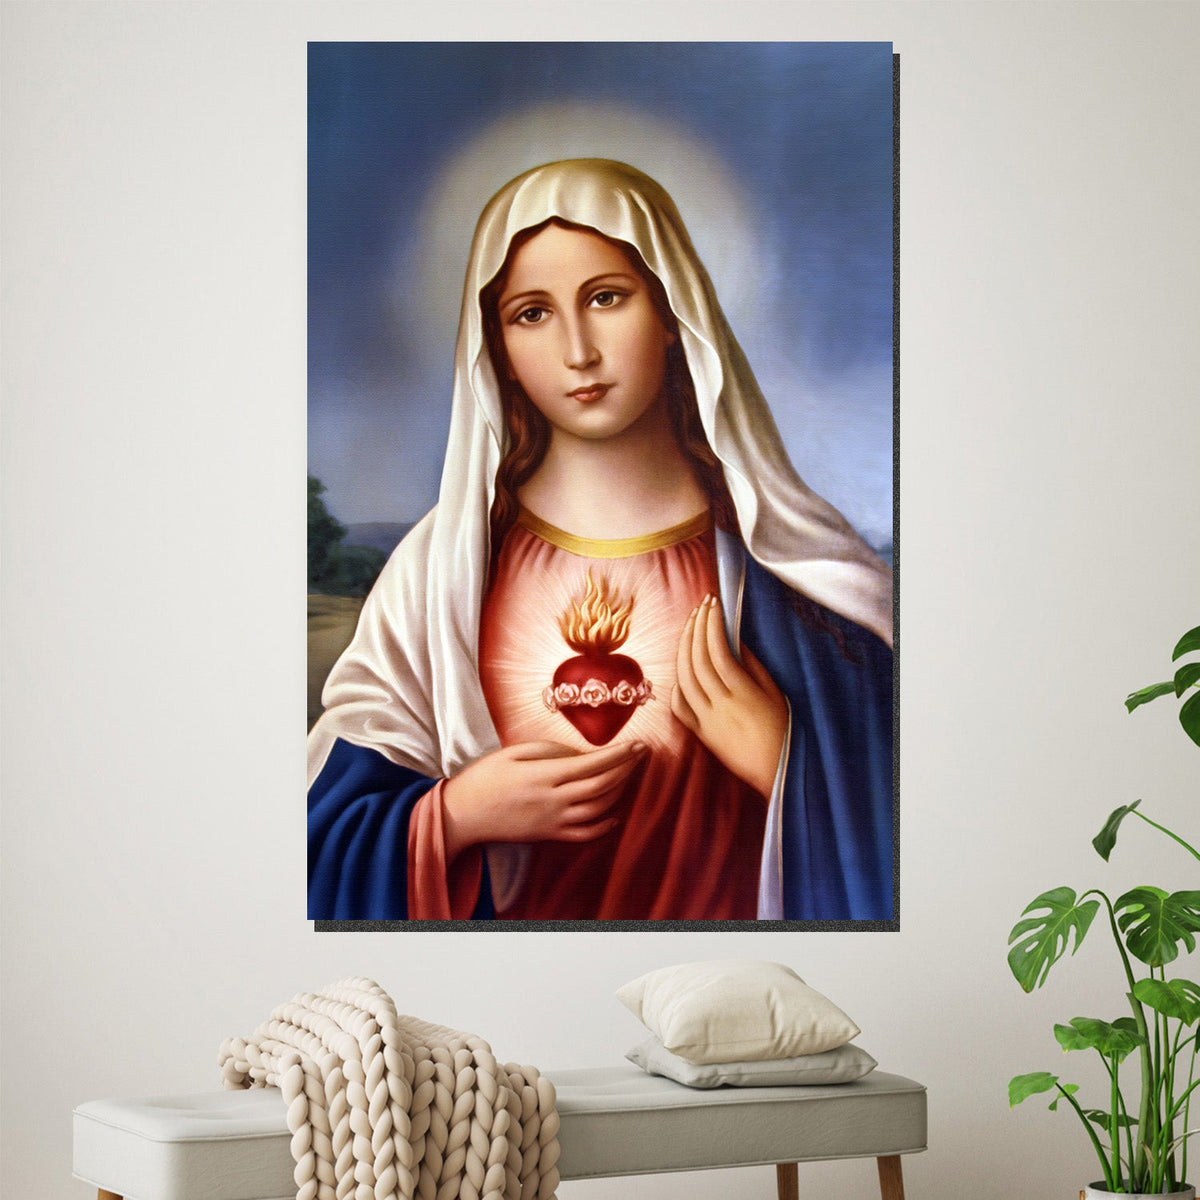 https://cdn.shopify.com/s/files/1/0387/9986/8044/products/OurLadyoftheSacredHeartCanvasArtprintStretched-2.jpg